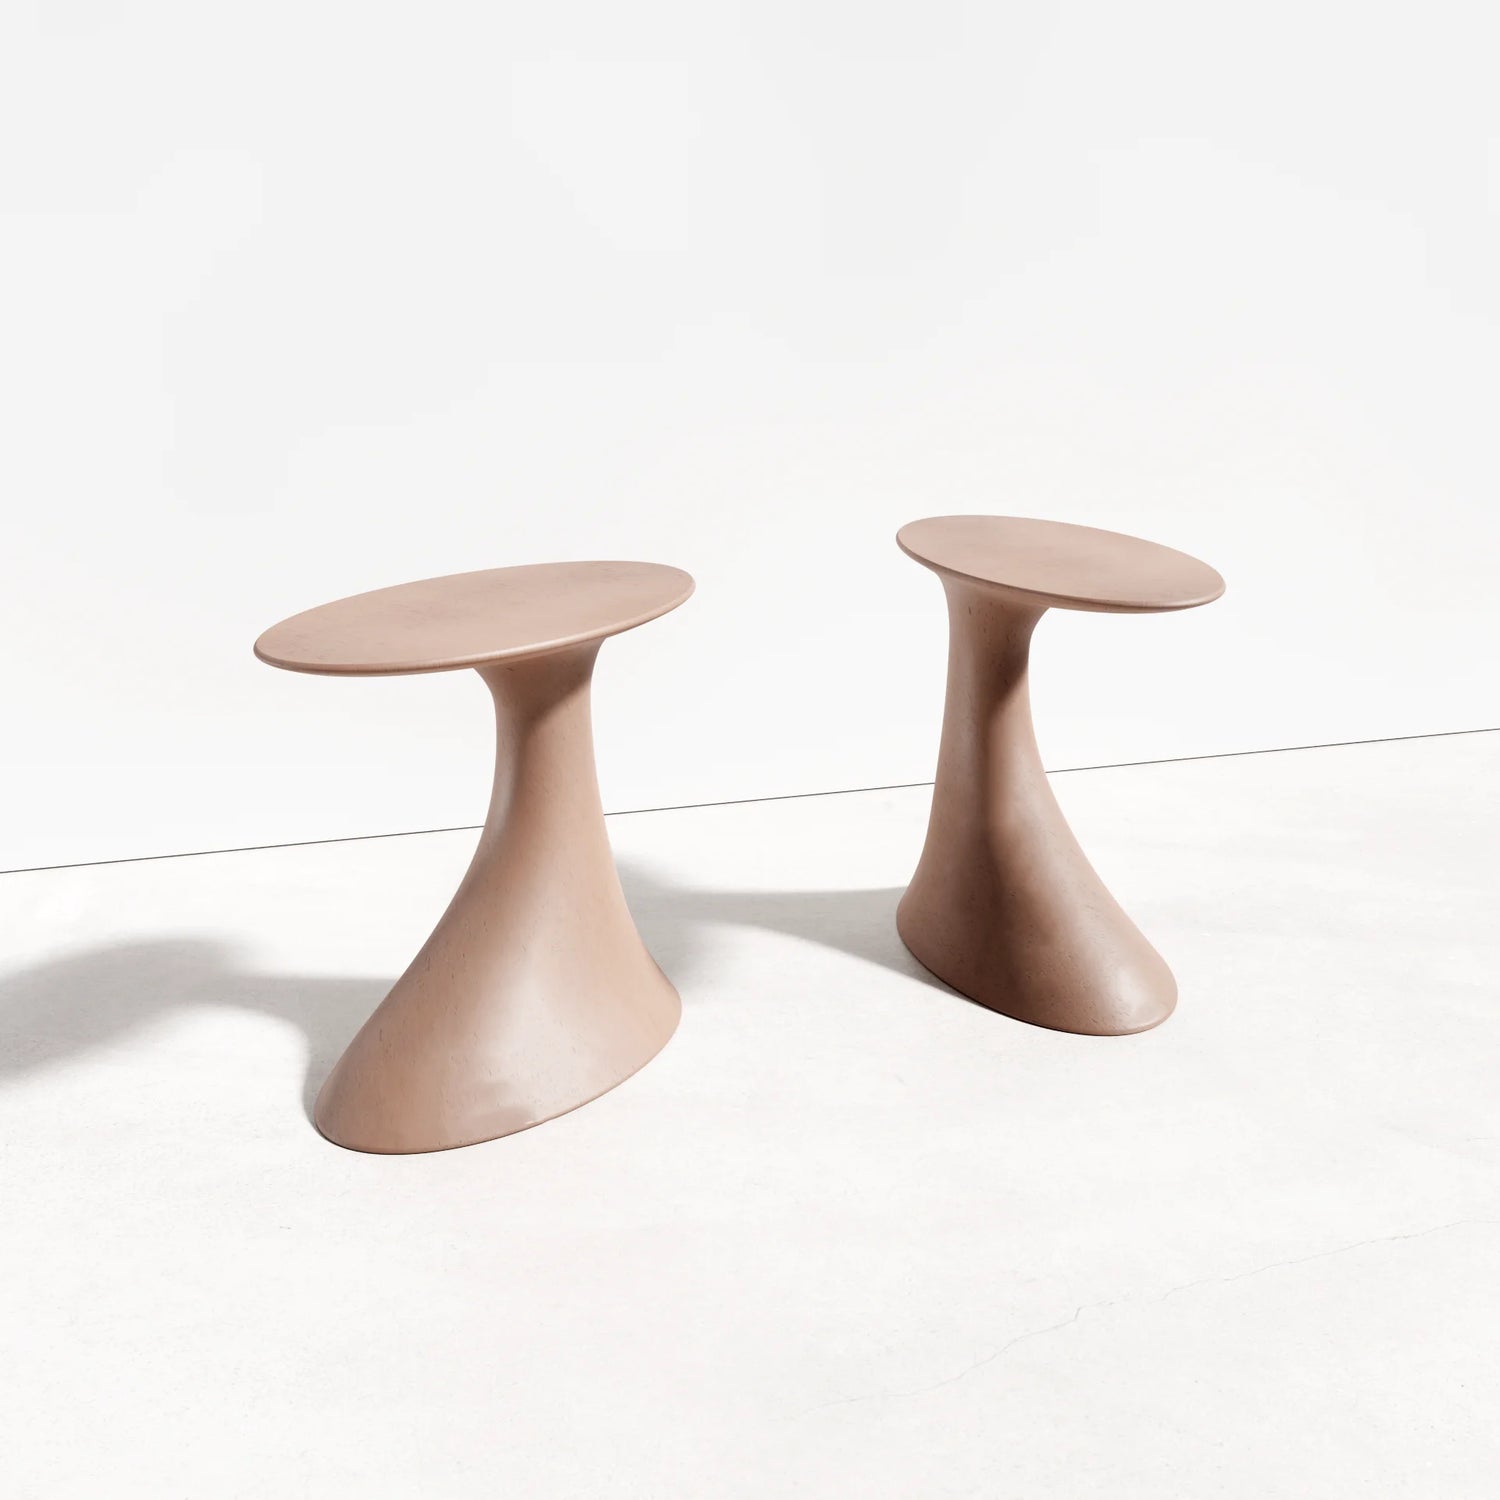 A set of two Oasis Concrete Side Tables in the colour Dingo.